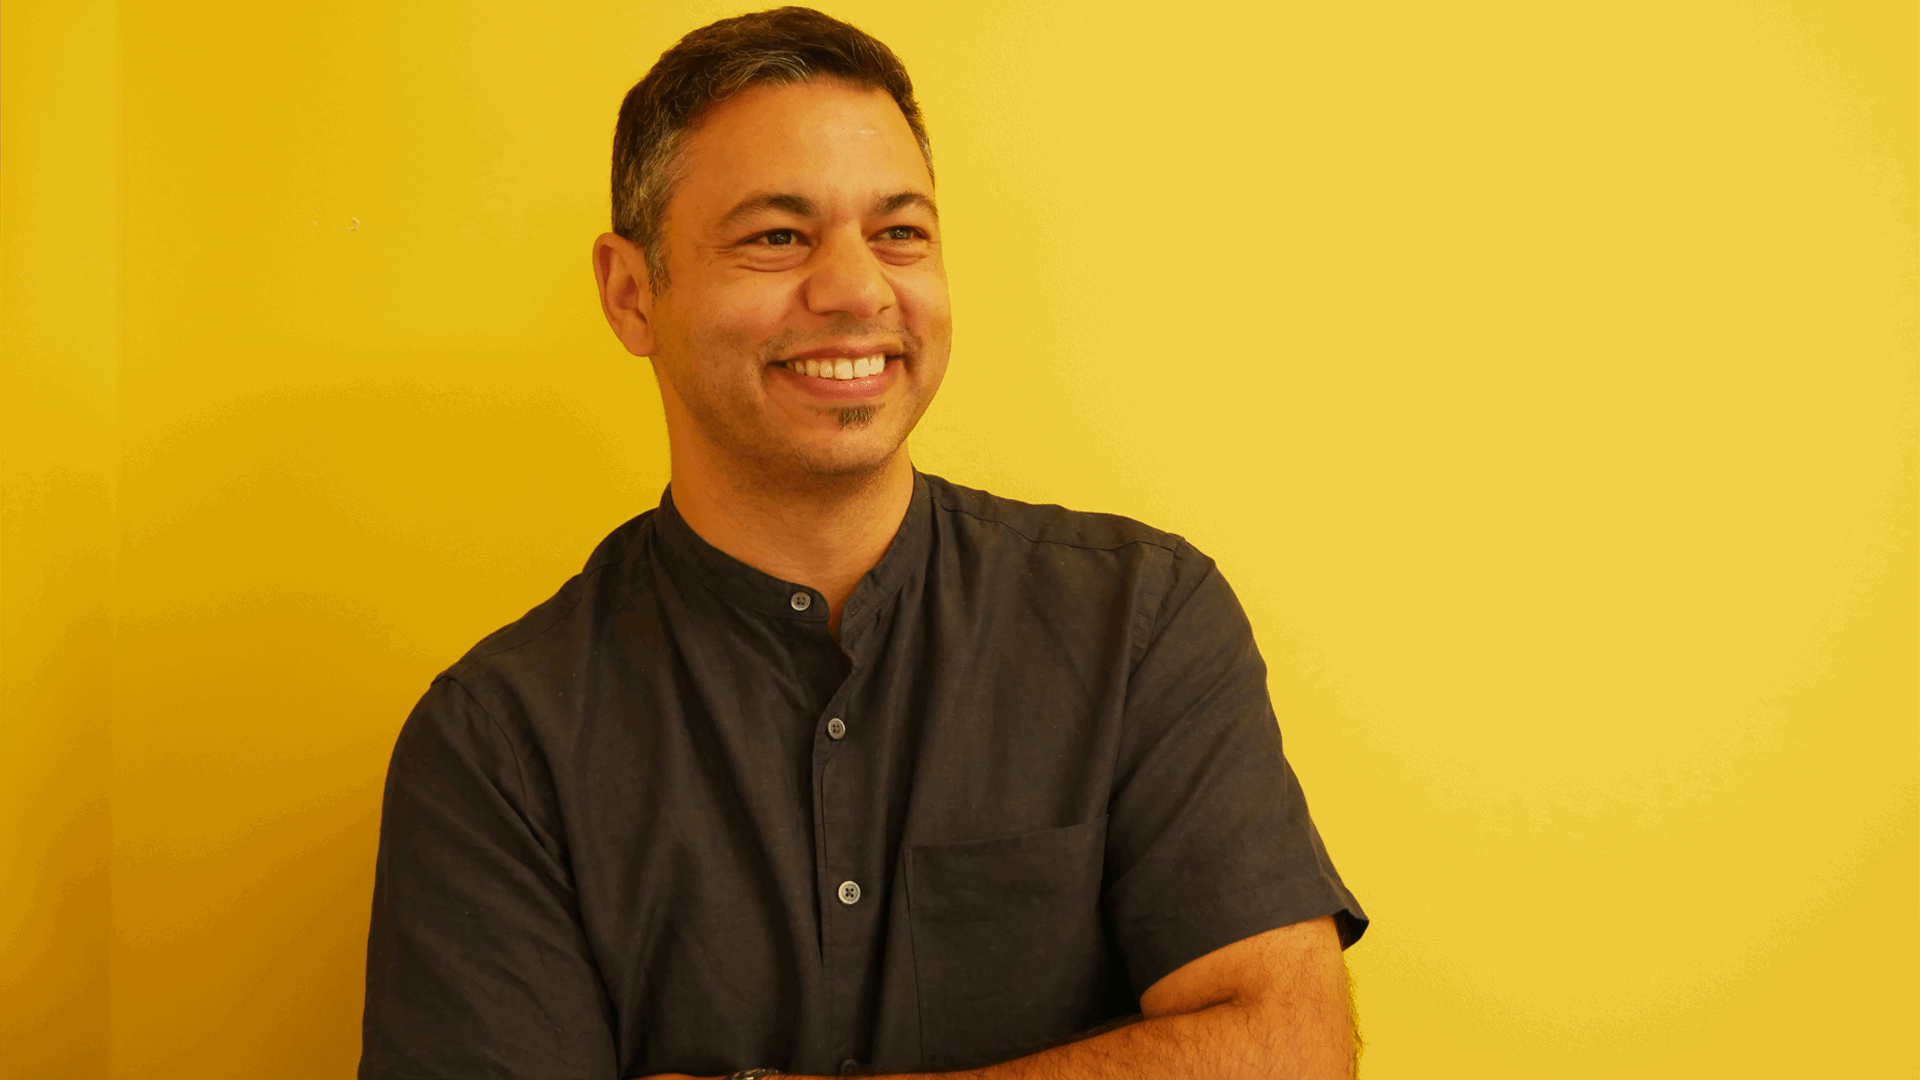 YoungMinds staff member Sacha Dingomal smiling against a yellow background